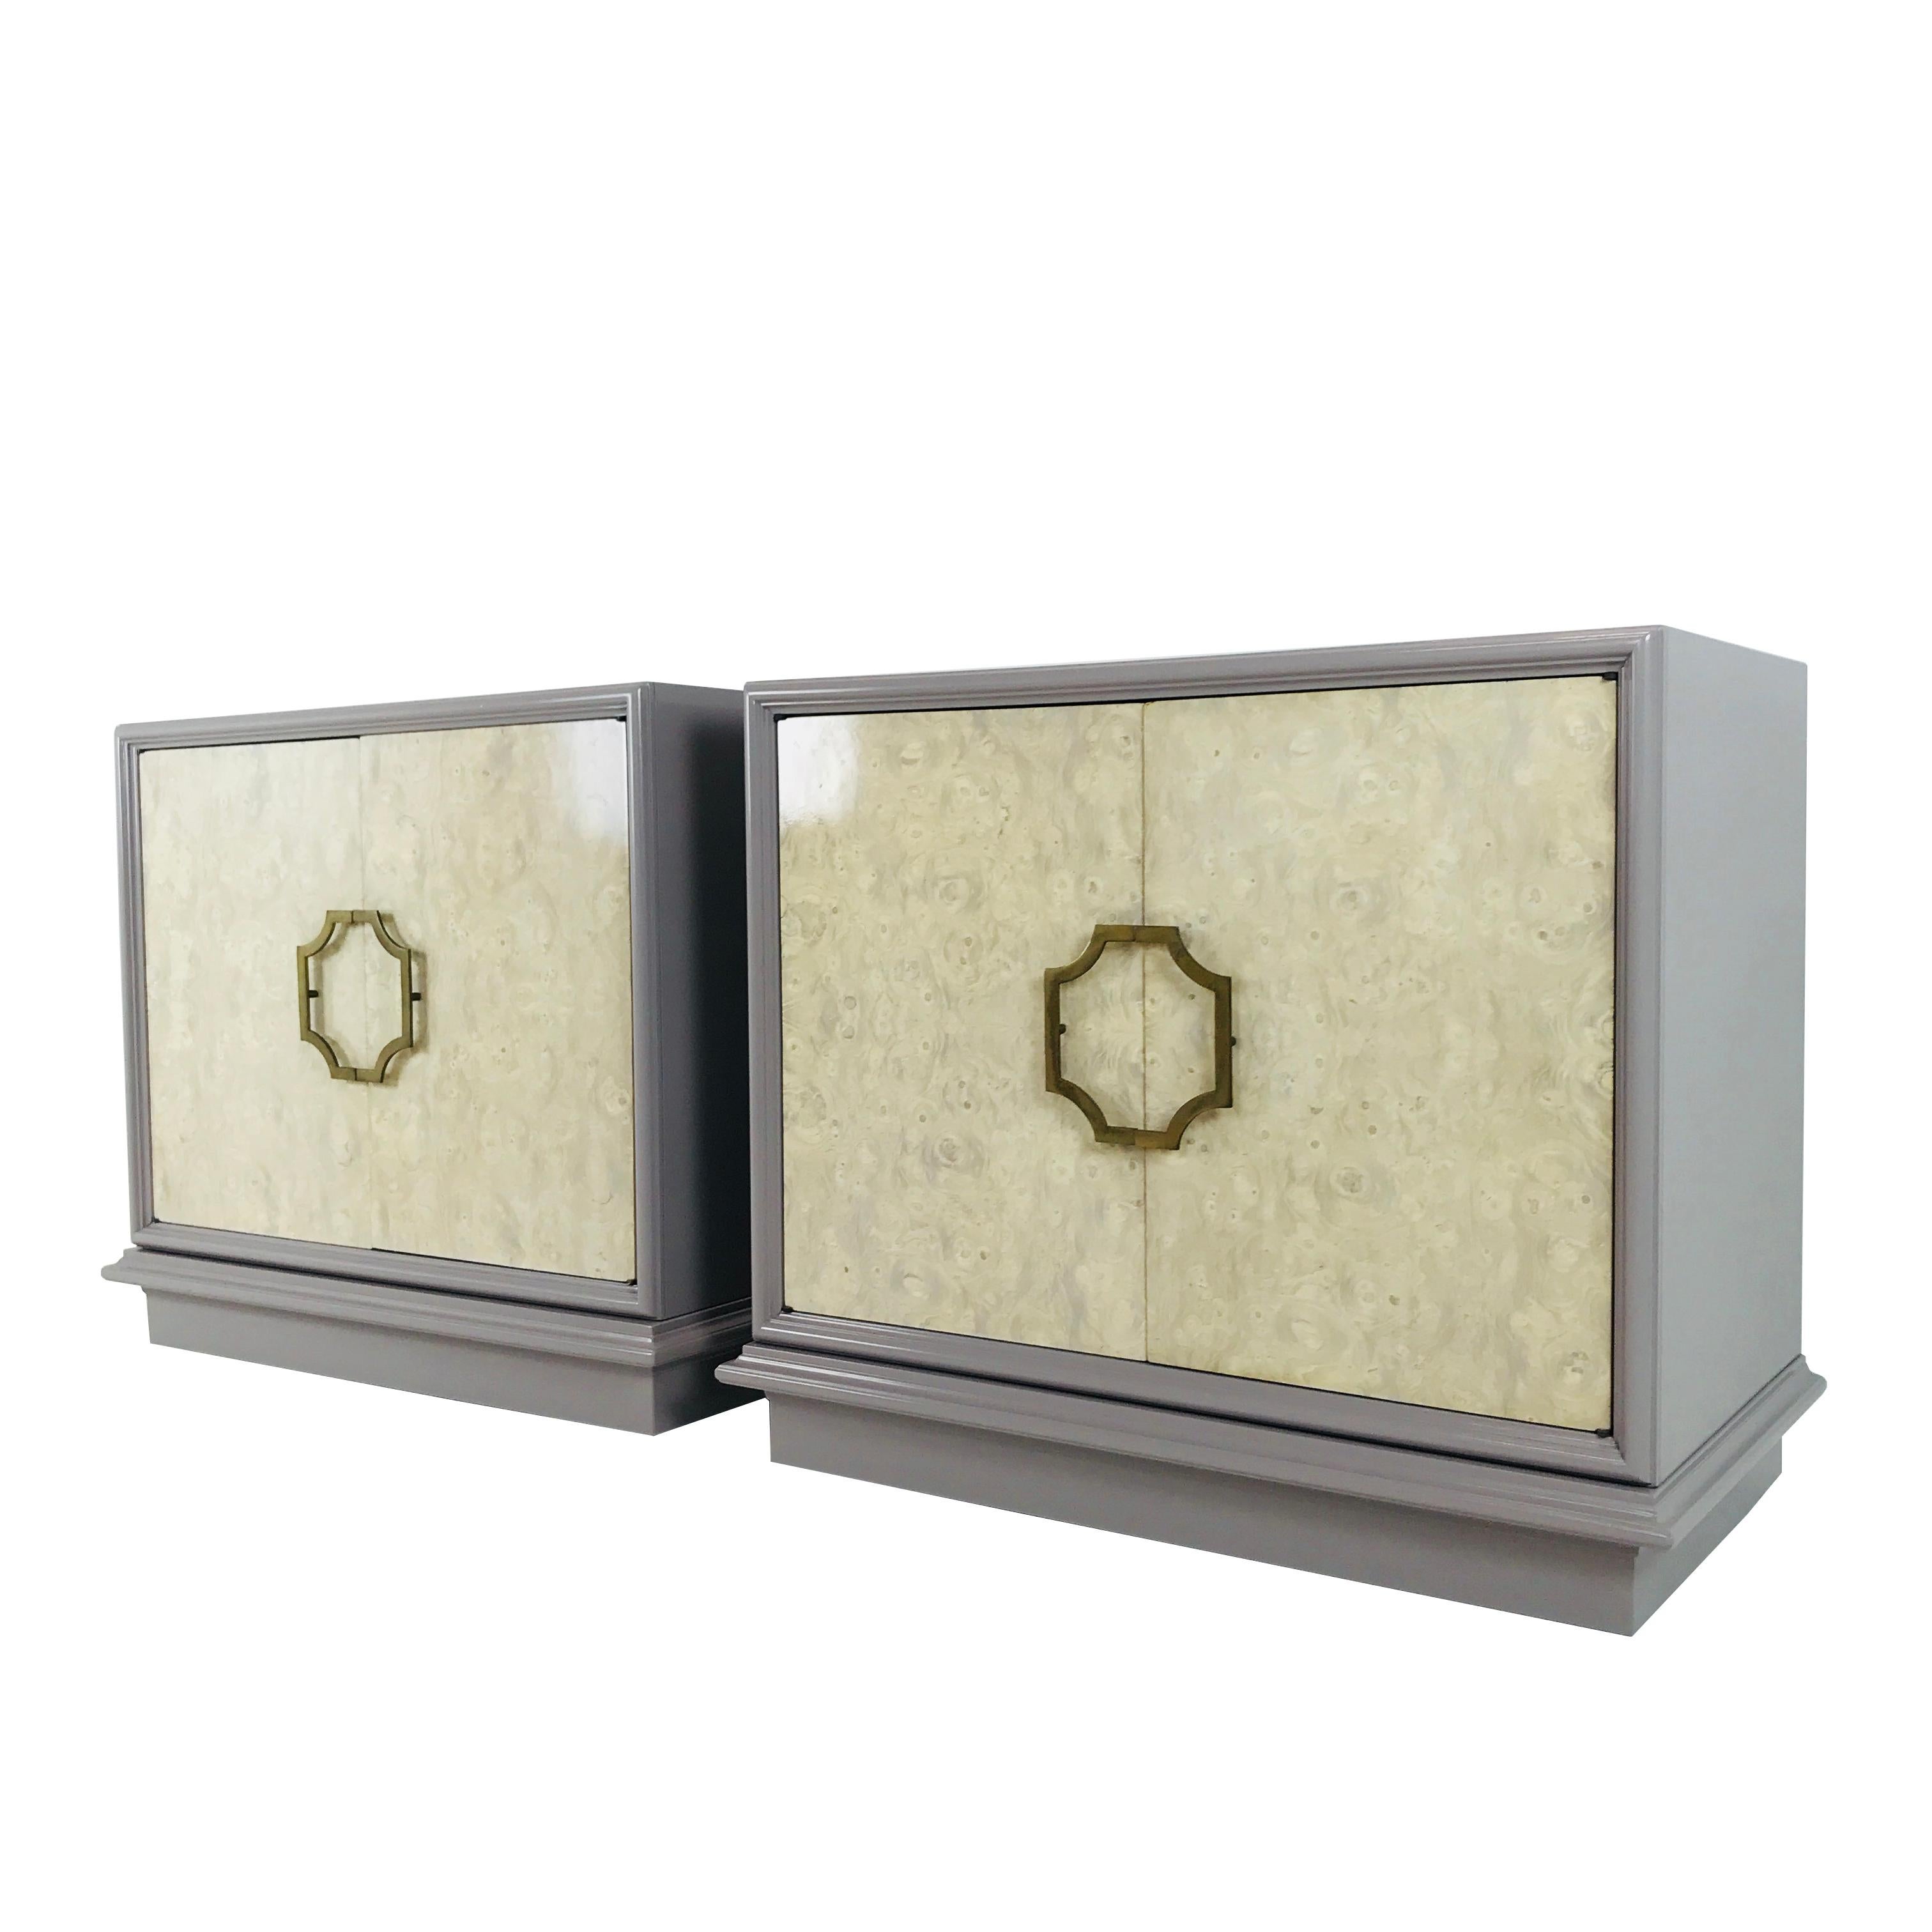 Pair of Mastercraft Bachelor Burl and Lacquer Cabinets